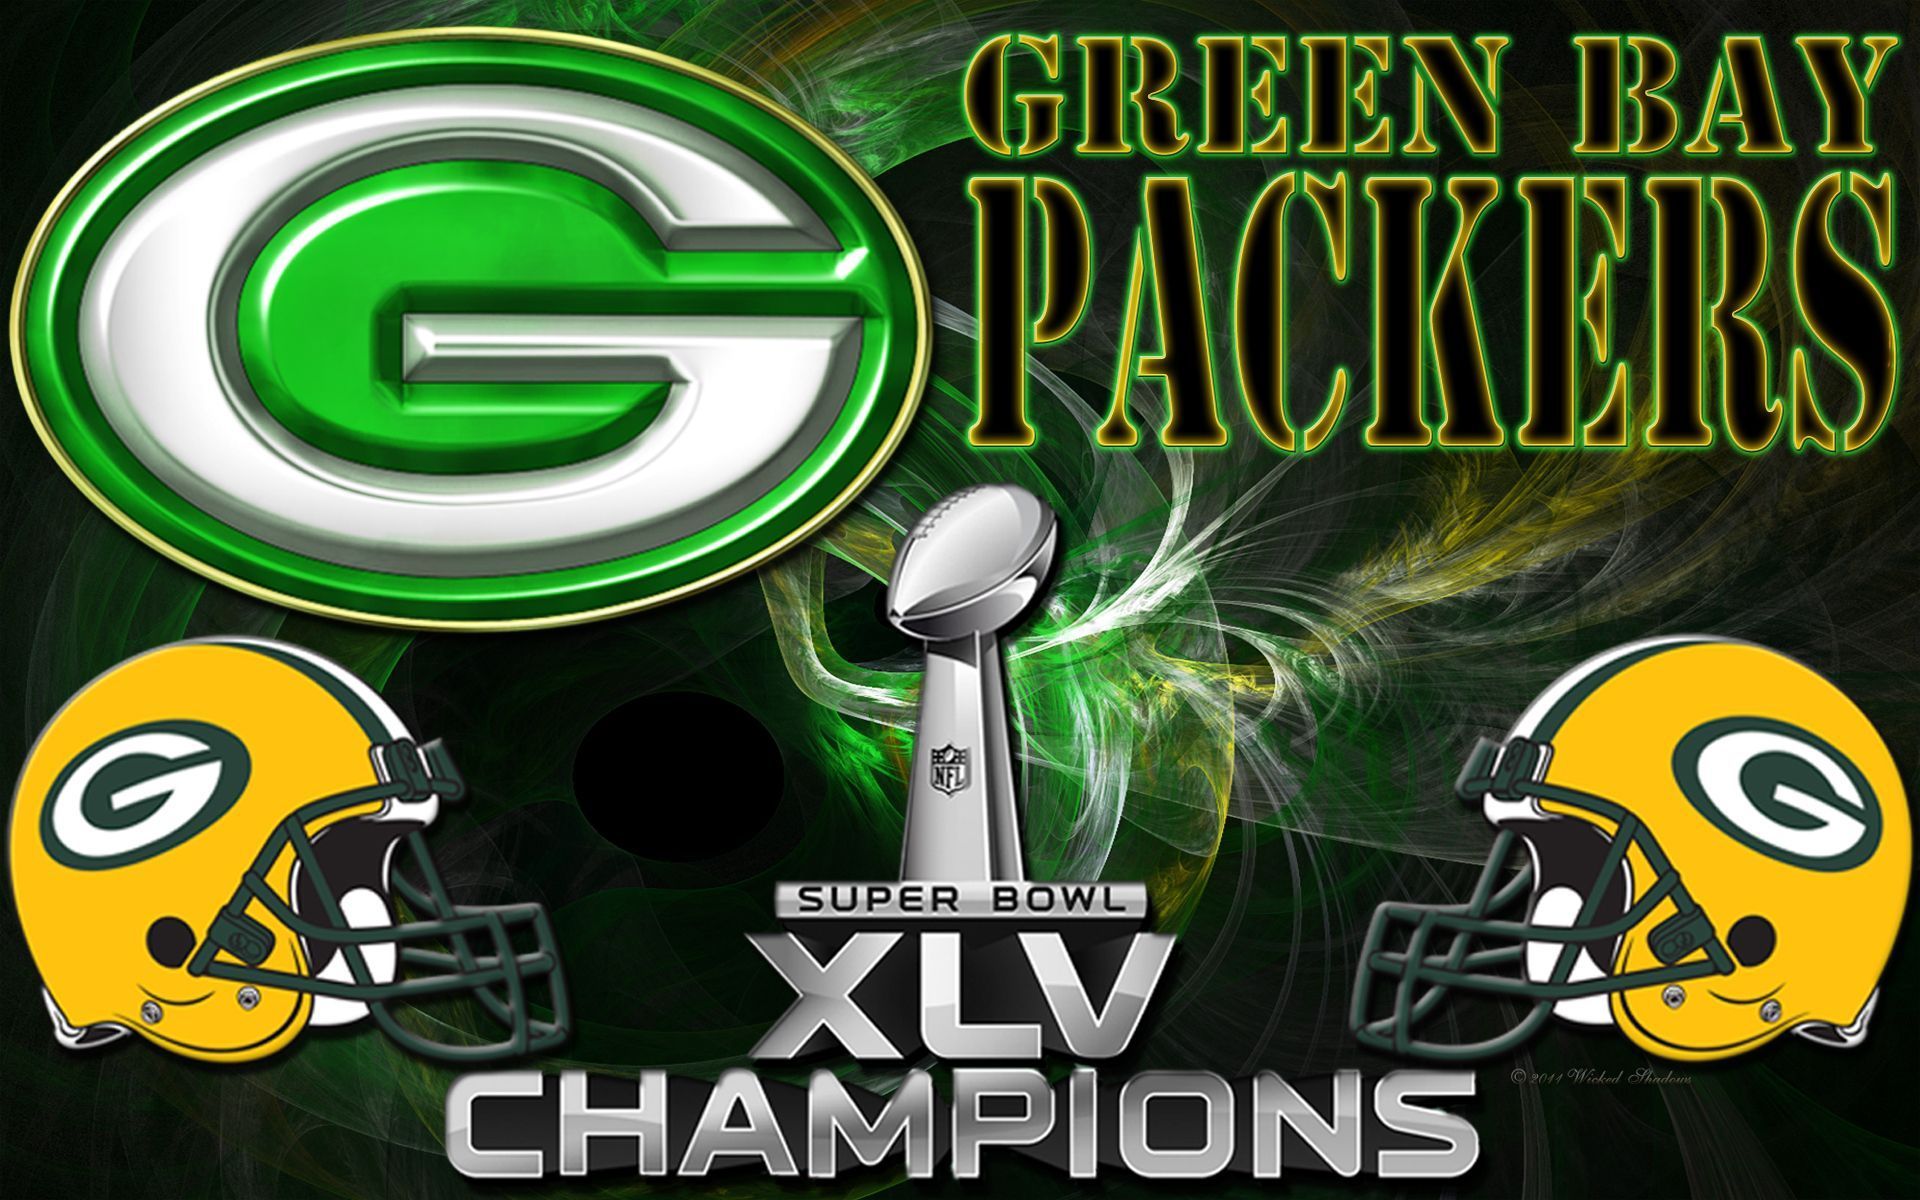 Wallpapers By Wicked Shadows: Green Bay Packers Super Bowl XLV ...